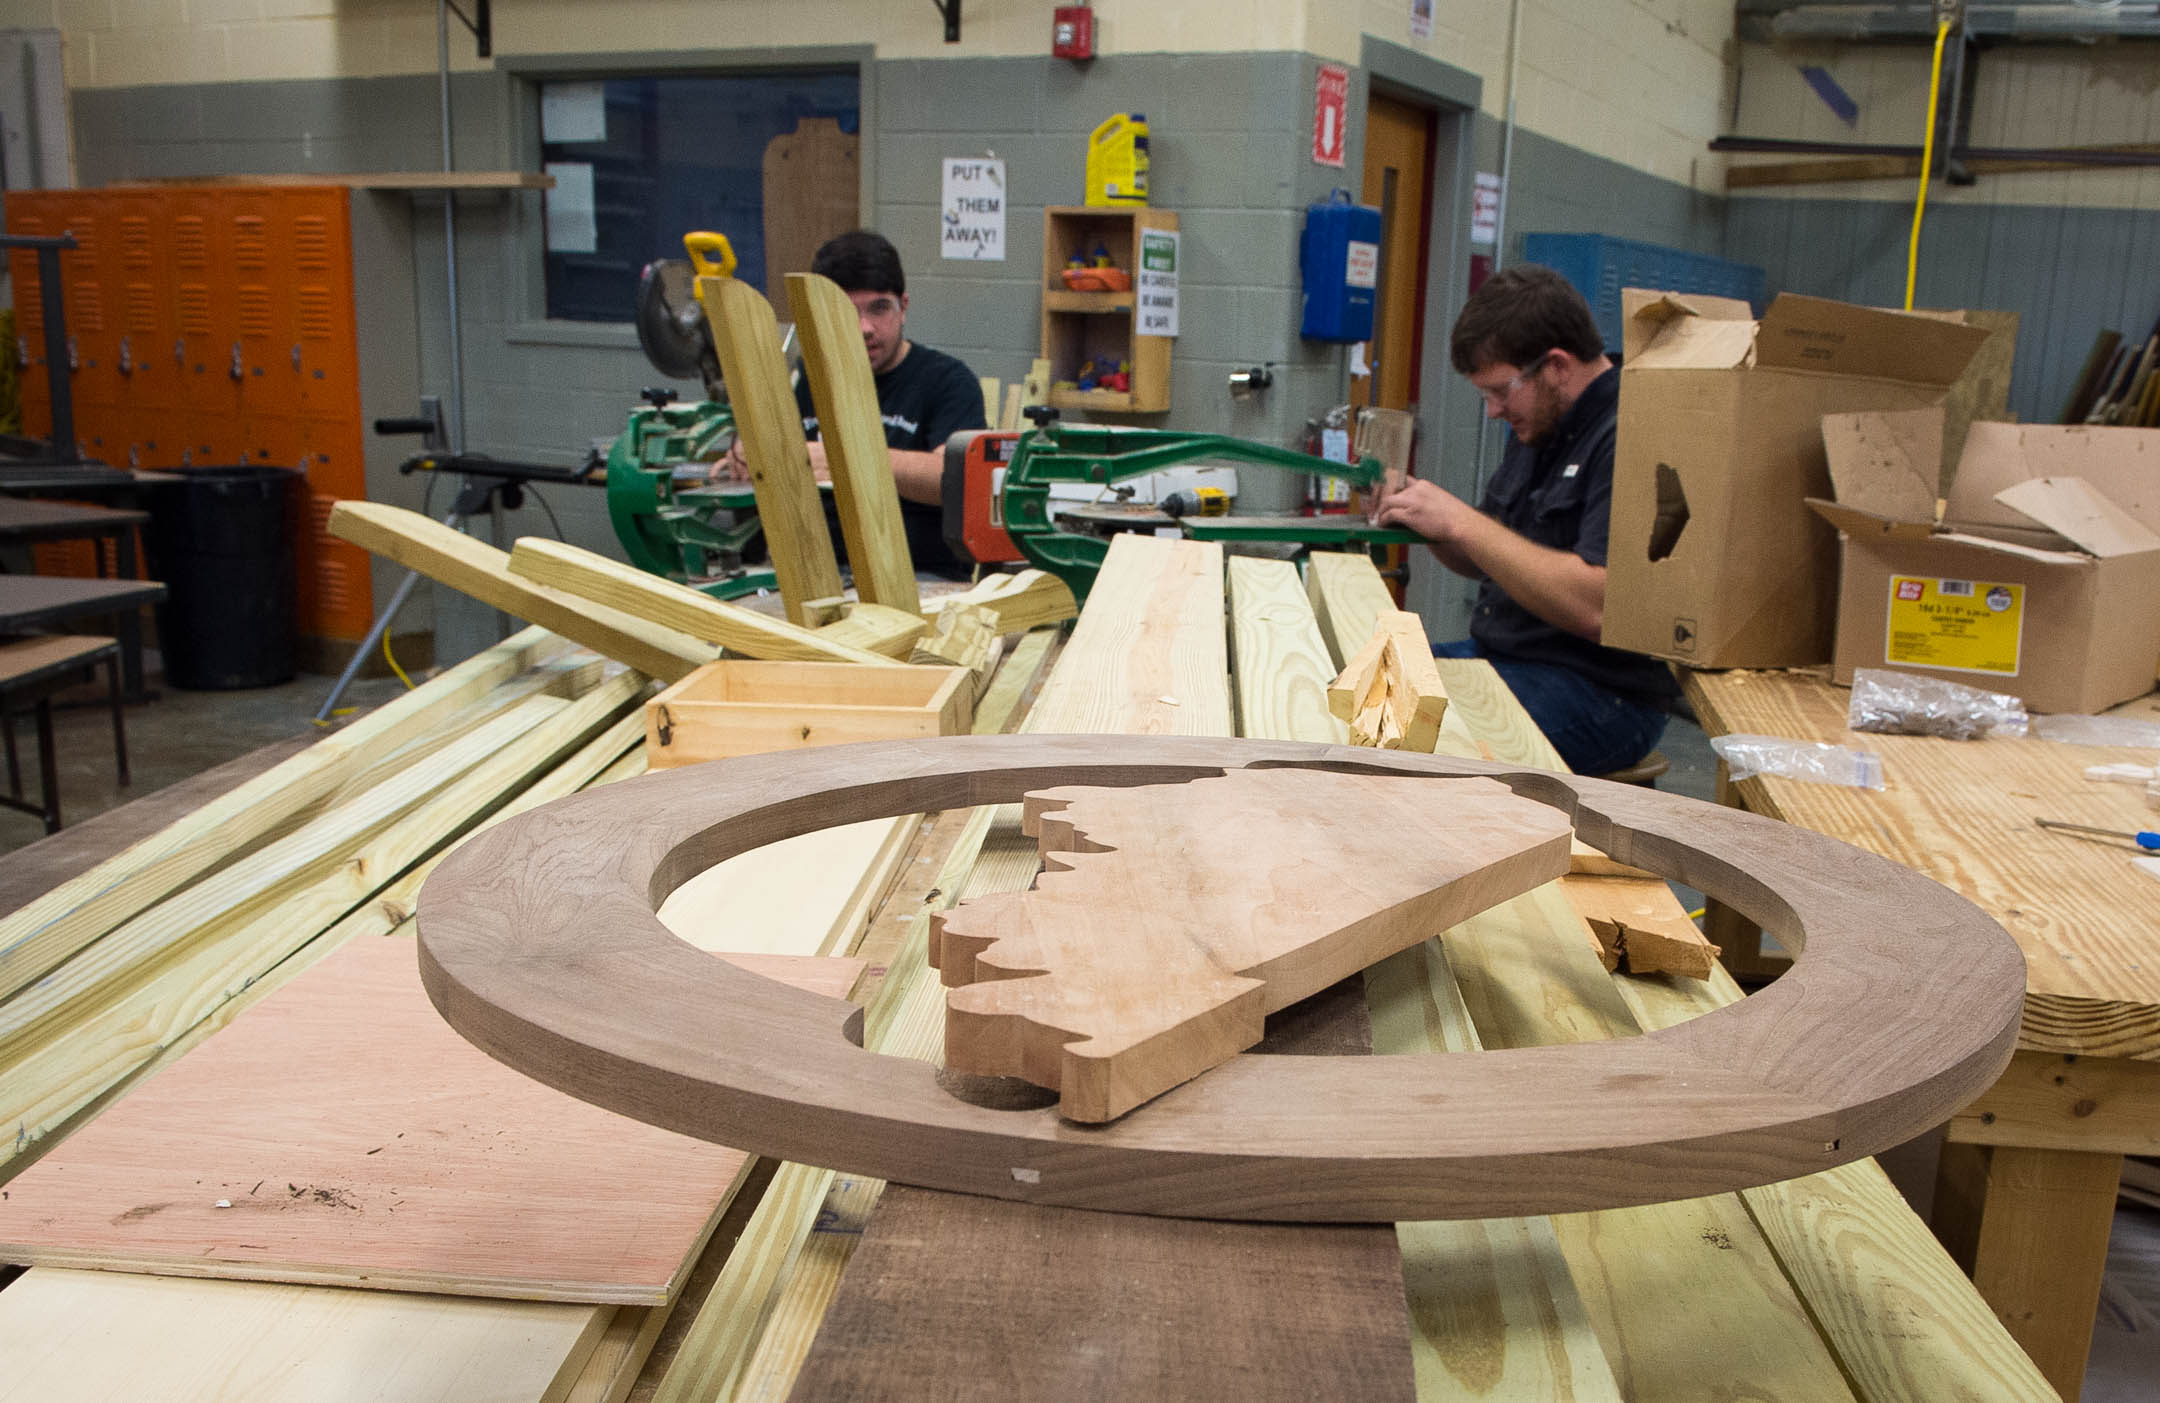 Students at the Breckinridge County Area Technology Center are building a wooden version of the Kentucky Department of Education's logo that will be displayed at the KDE offices in Frankfort. Students such as Nick Stinson, left, are working on the logo under the direction of carpentry instructor Will Farmer. Photo by Bobby Ellis, Dec. 21, 2016